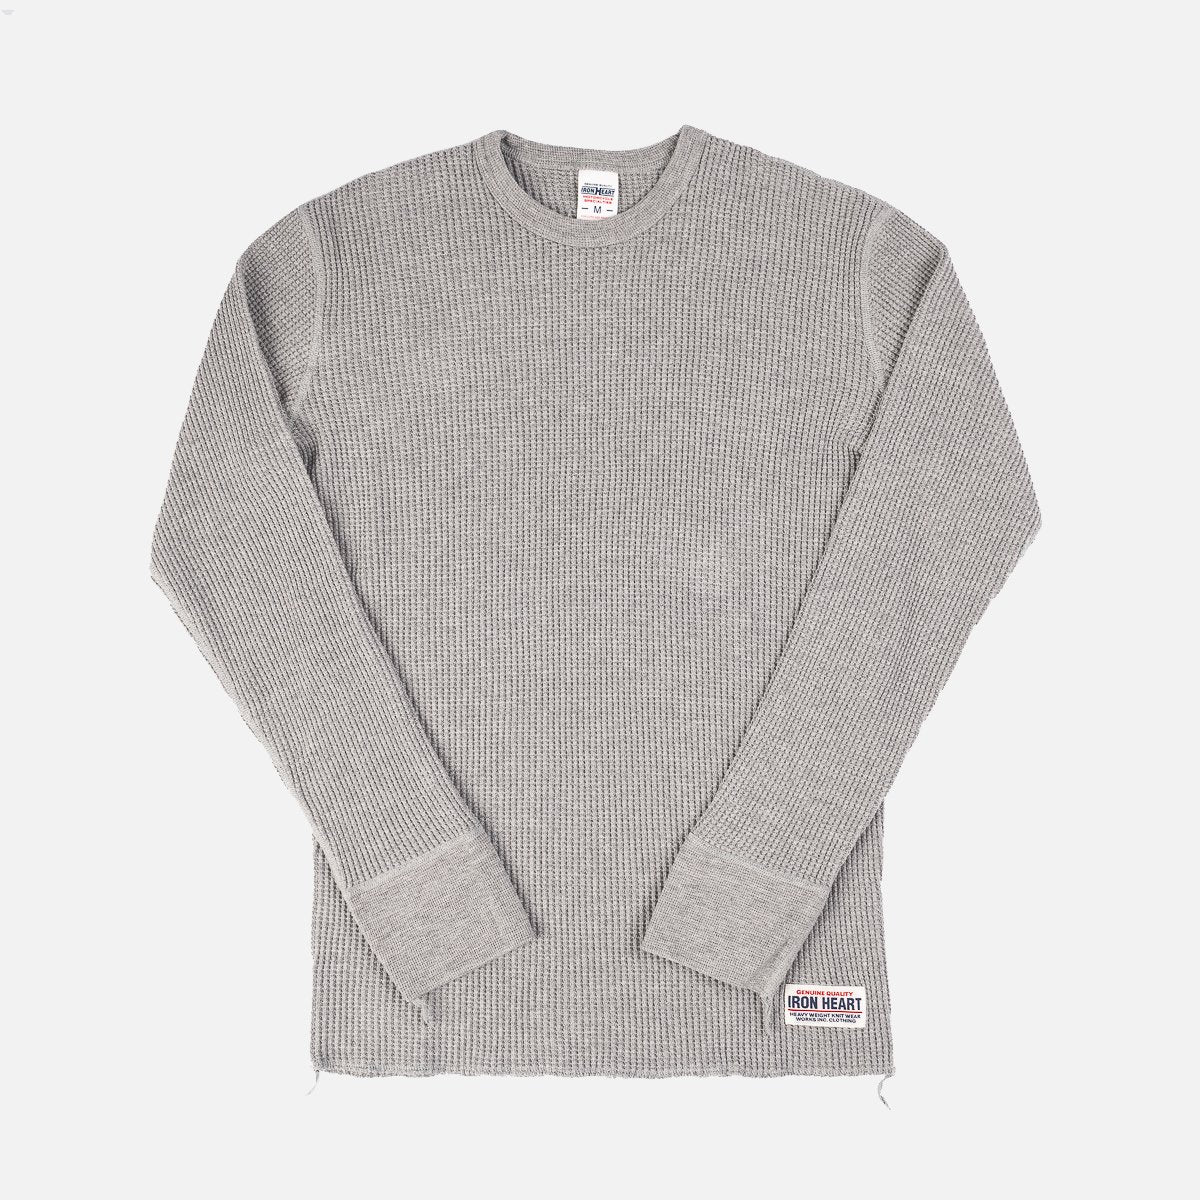 IHTL-1301-GRY Waffle Knit Long Sleeve Crew Neck Thermal Grey